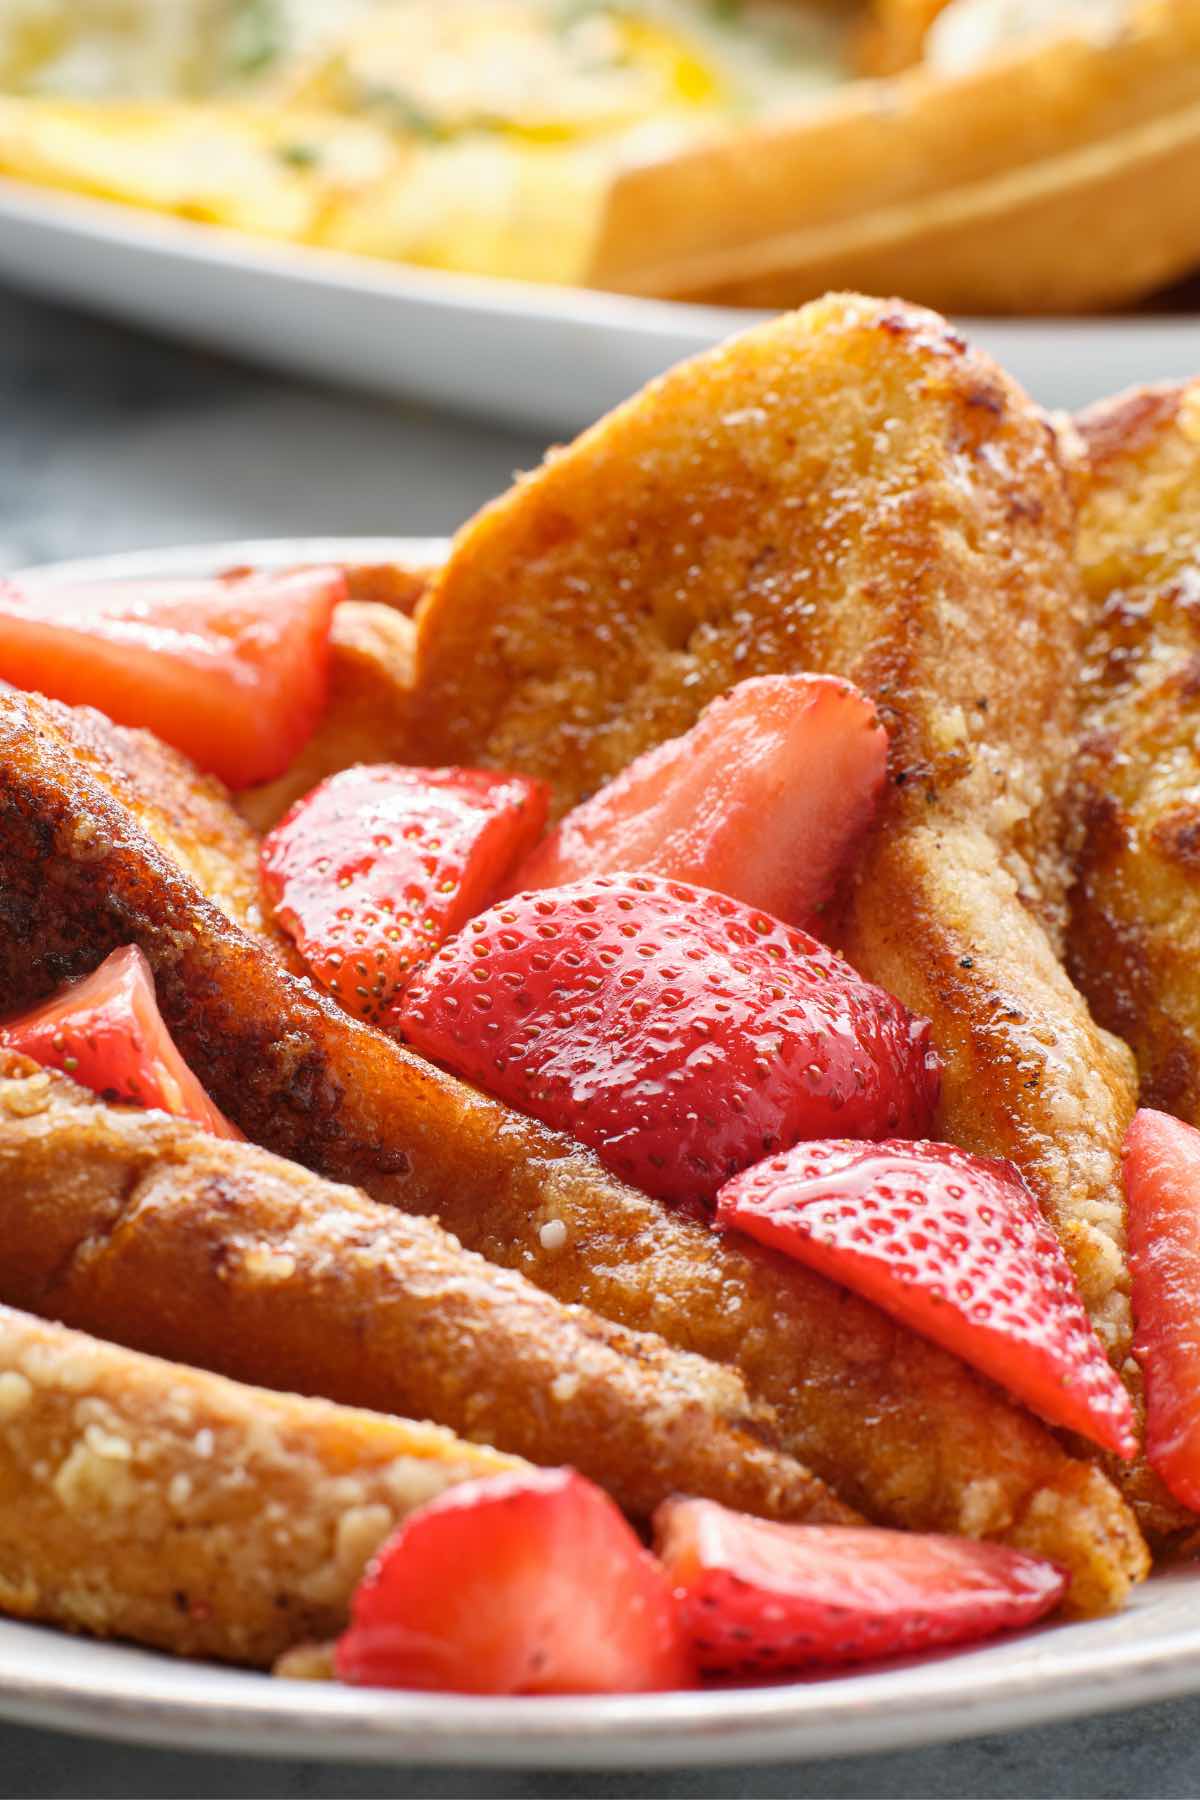 The sweet and buttery IHOP French Toast is super easy to make and perfect for weekend breakfast! The balanced flavors are soaked into brioche bread, with a hint of cinnamon and vanilla. Serve with strawberries or bananas, and this is the recipe your whole family will go crazy for. 